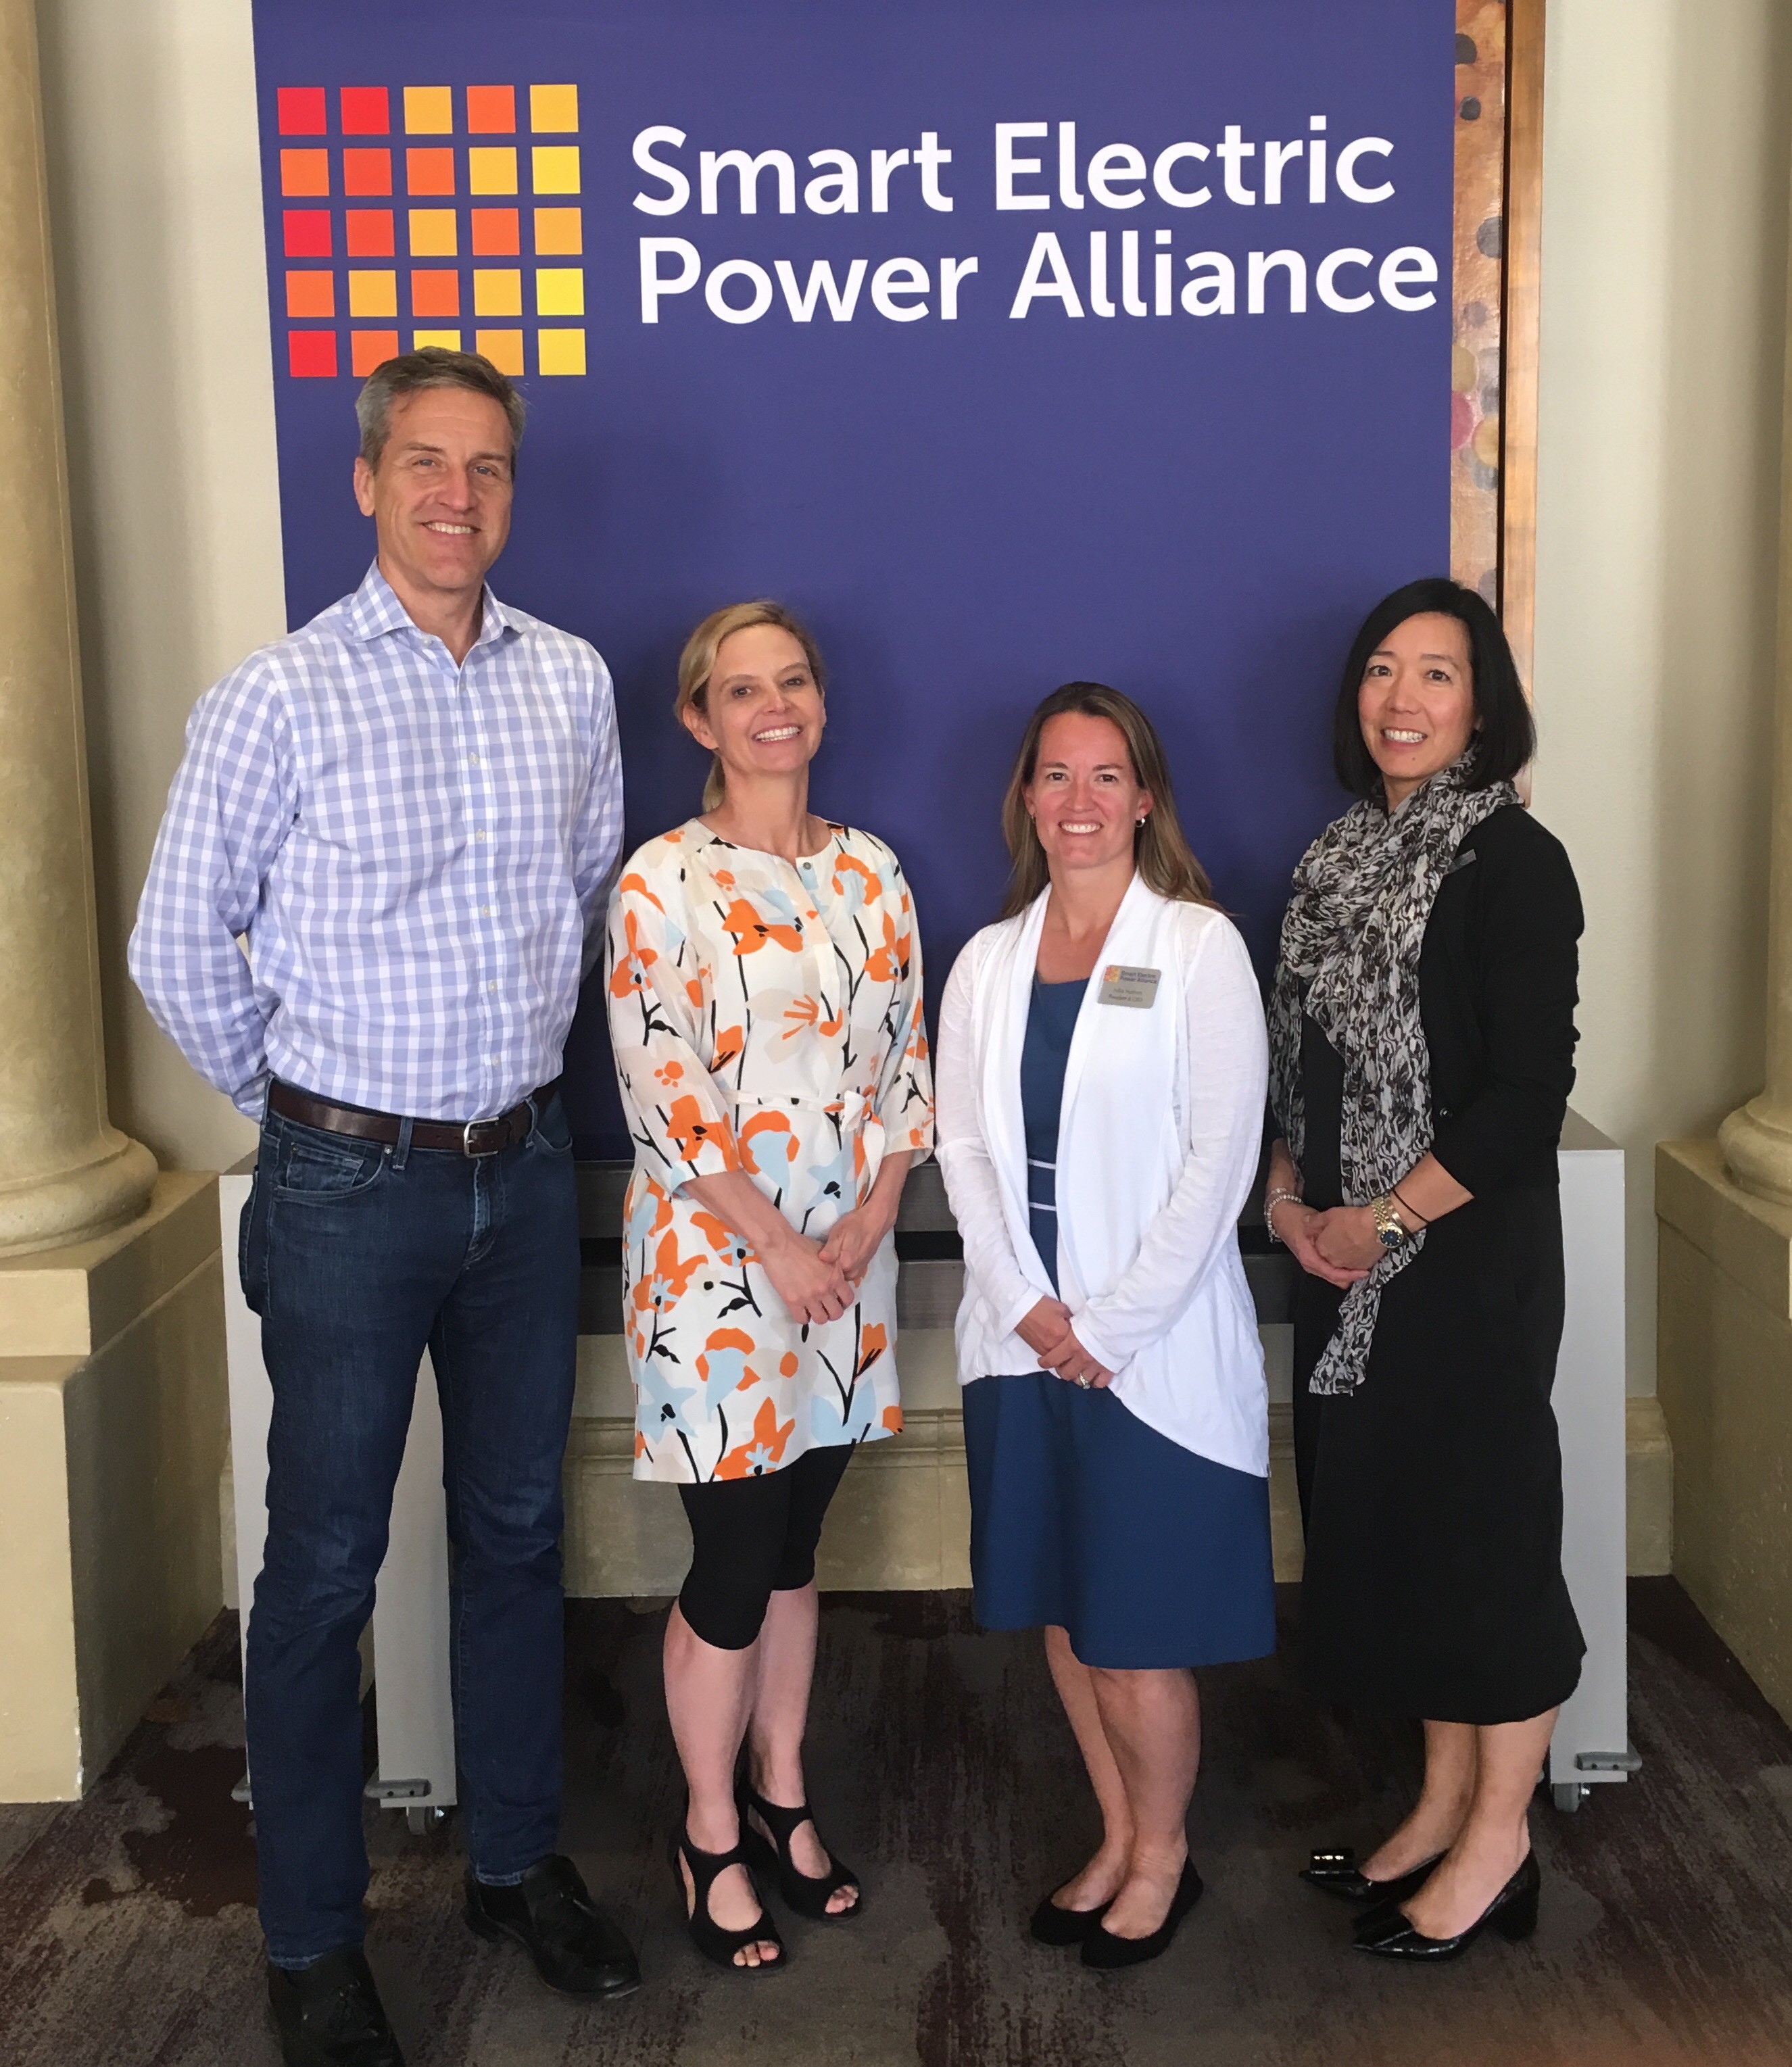 (Image) SEPA’s changing Board leadership (left to right): Cris Eugster of CPS Energy, incoming Chair; Mary Kipp of El Paso Electric, new Chair-Elect; SEPA President and CEO Julia Hamm; and Past-Chair Caroline Choi of Southern California Edison.